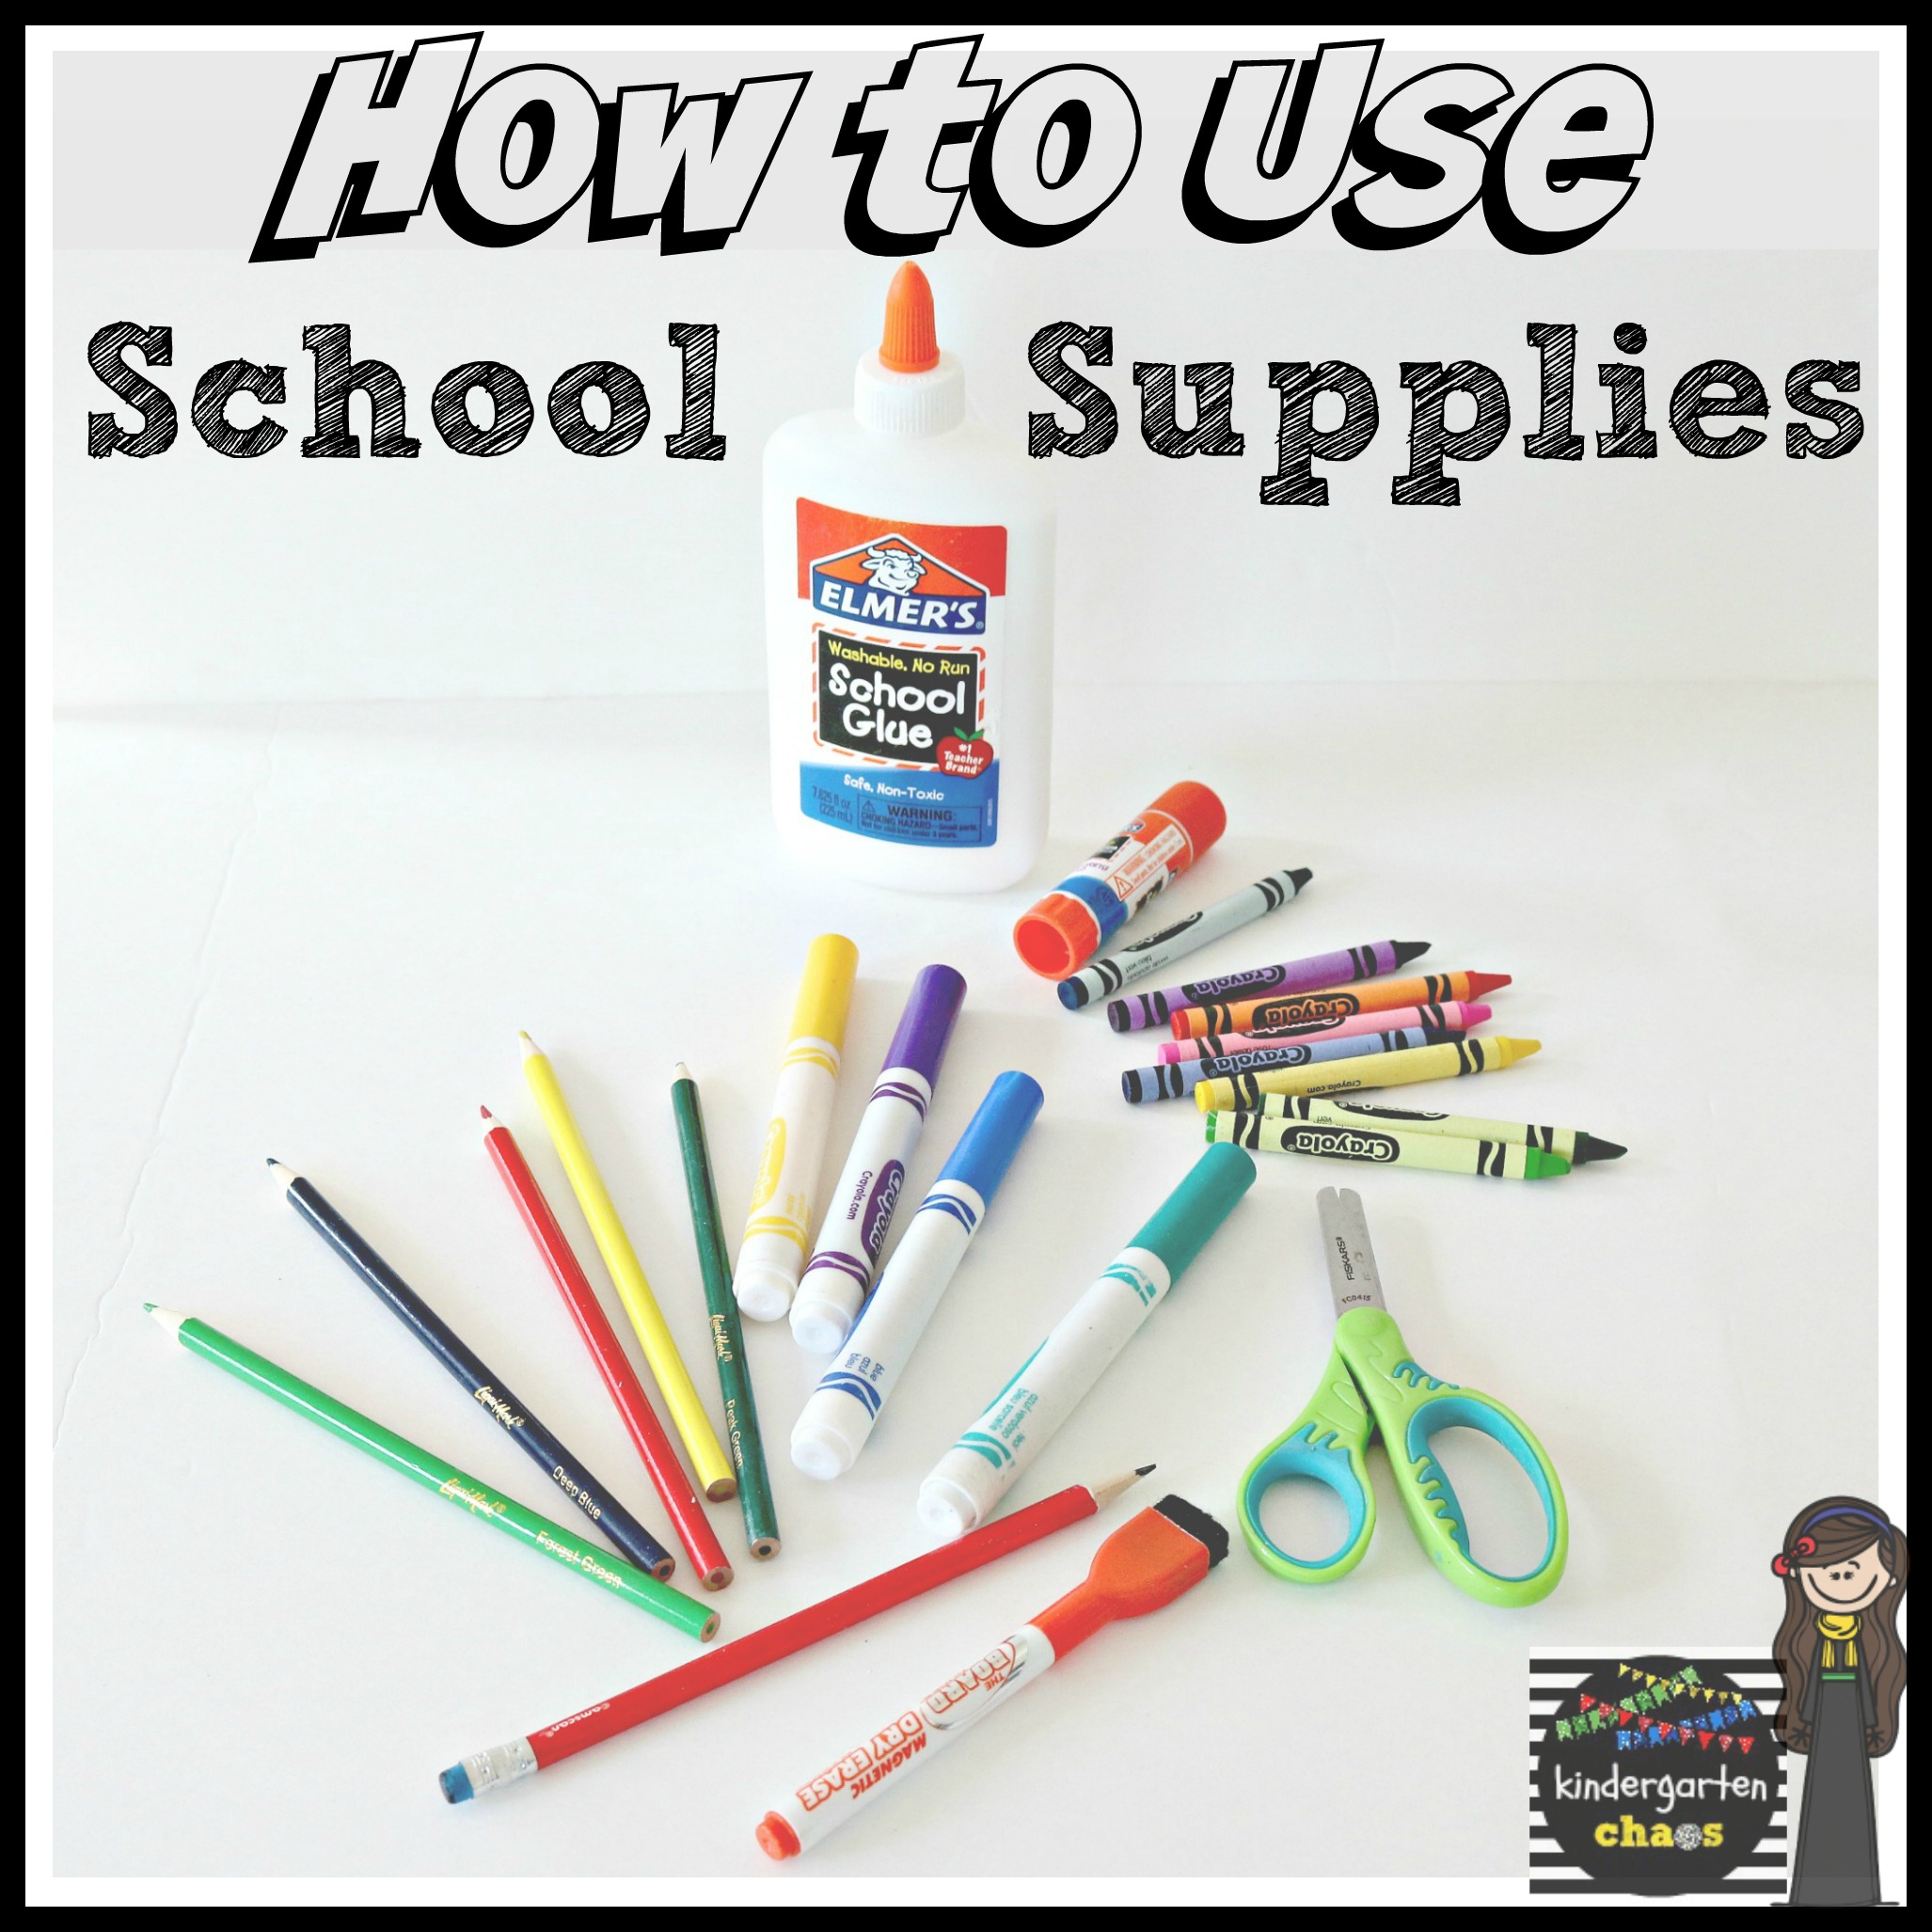 Printable Pack: How To Use School Supplies. A printable for each school supply to help kids learn how to use them properly including scissors, glue, dry erase marker, crayon, etc. 